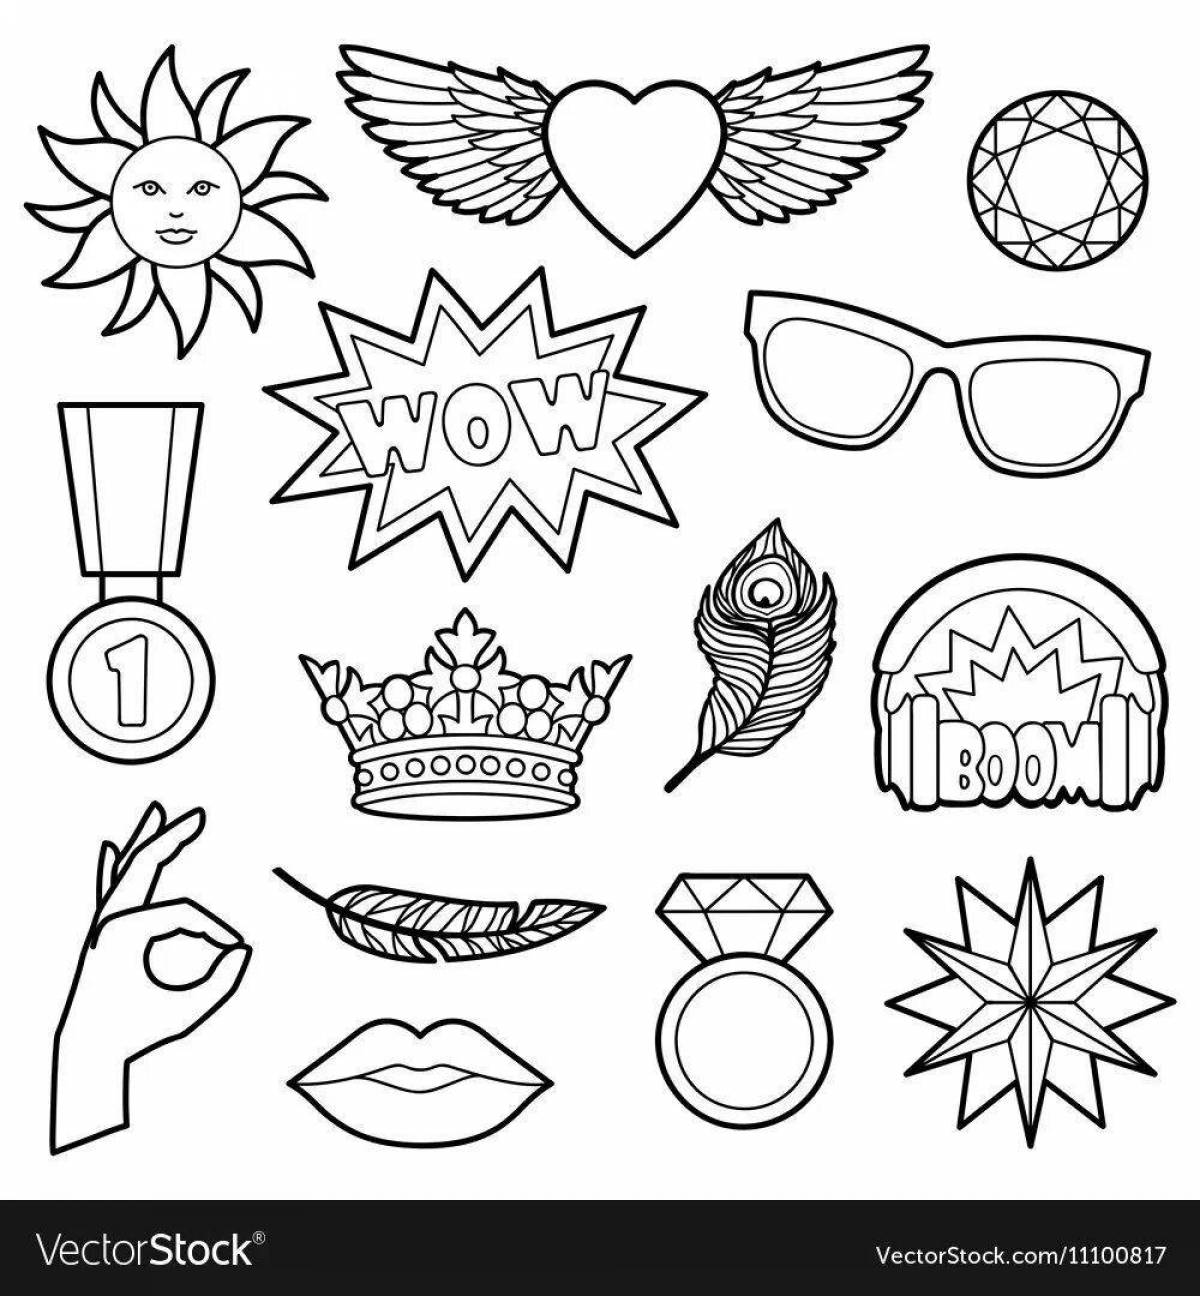 Coloring page funny blindfolds